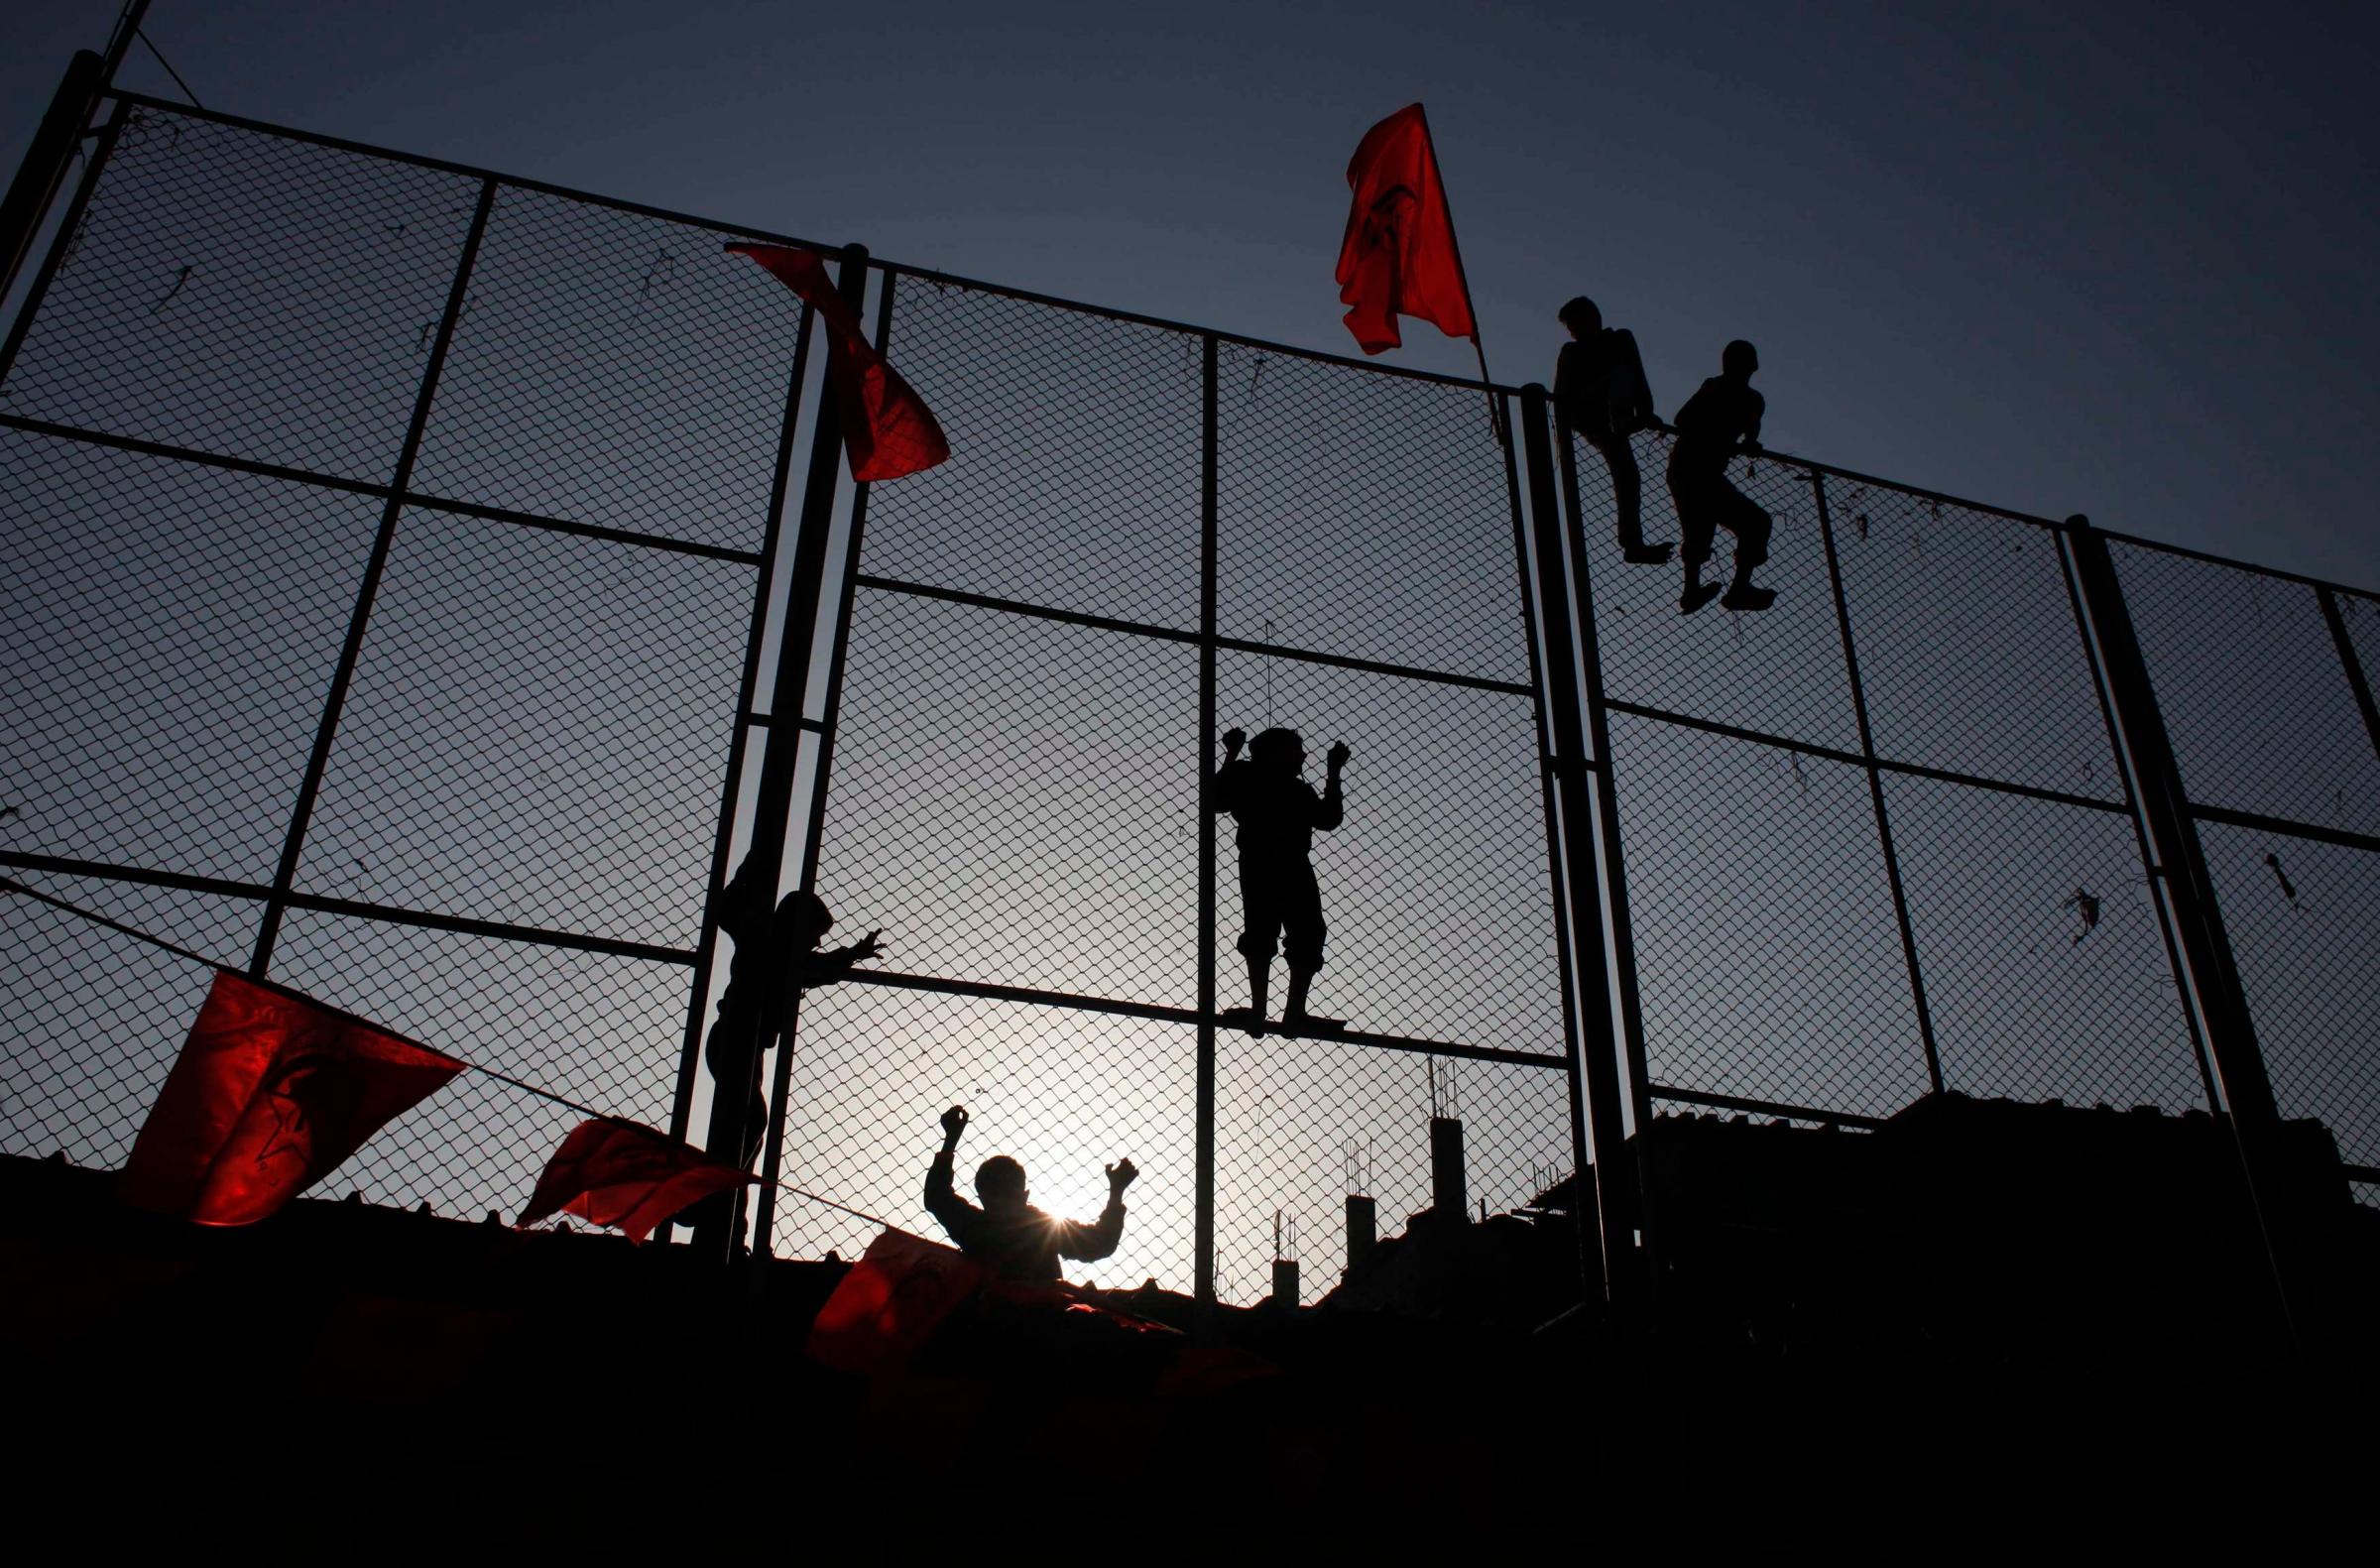 Palestinian boys climb a fence to watch a rally marking the 45th anniversary of the founding of the Democratic Front for the Liberation of Palestine (DFLP), in Rafah